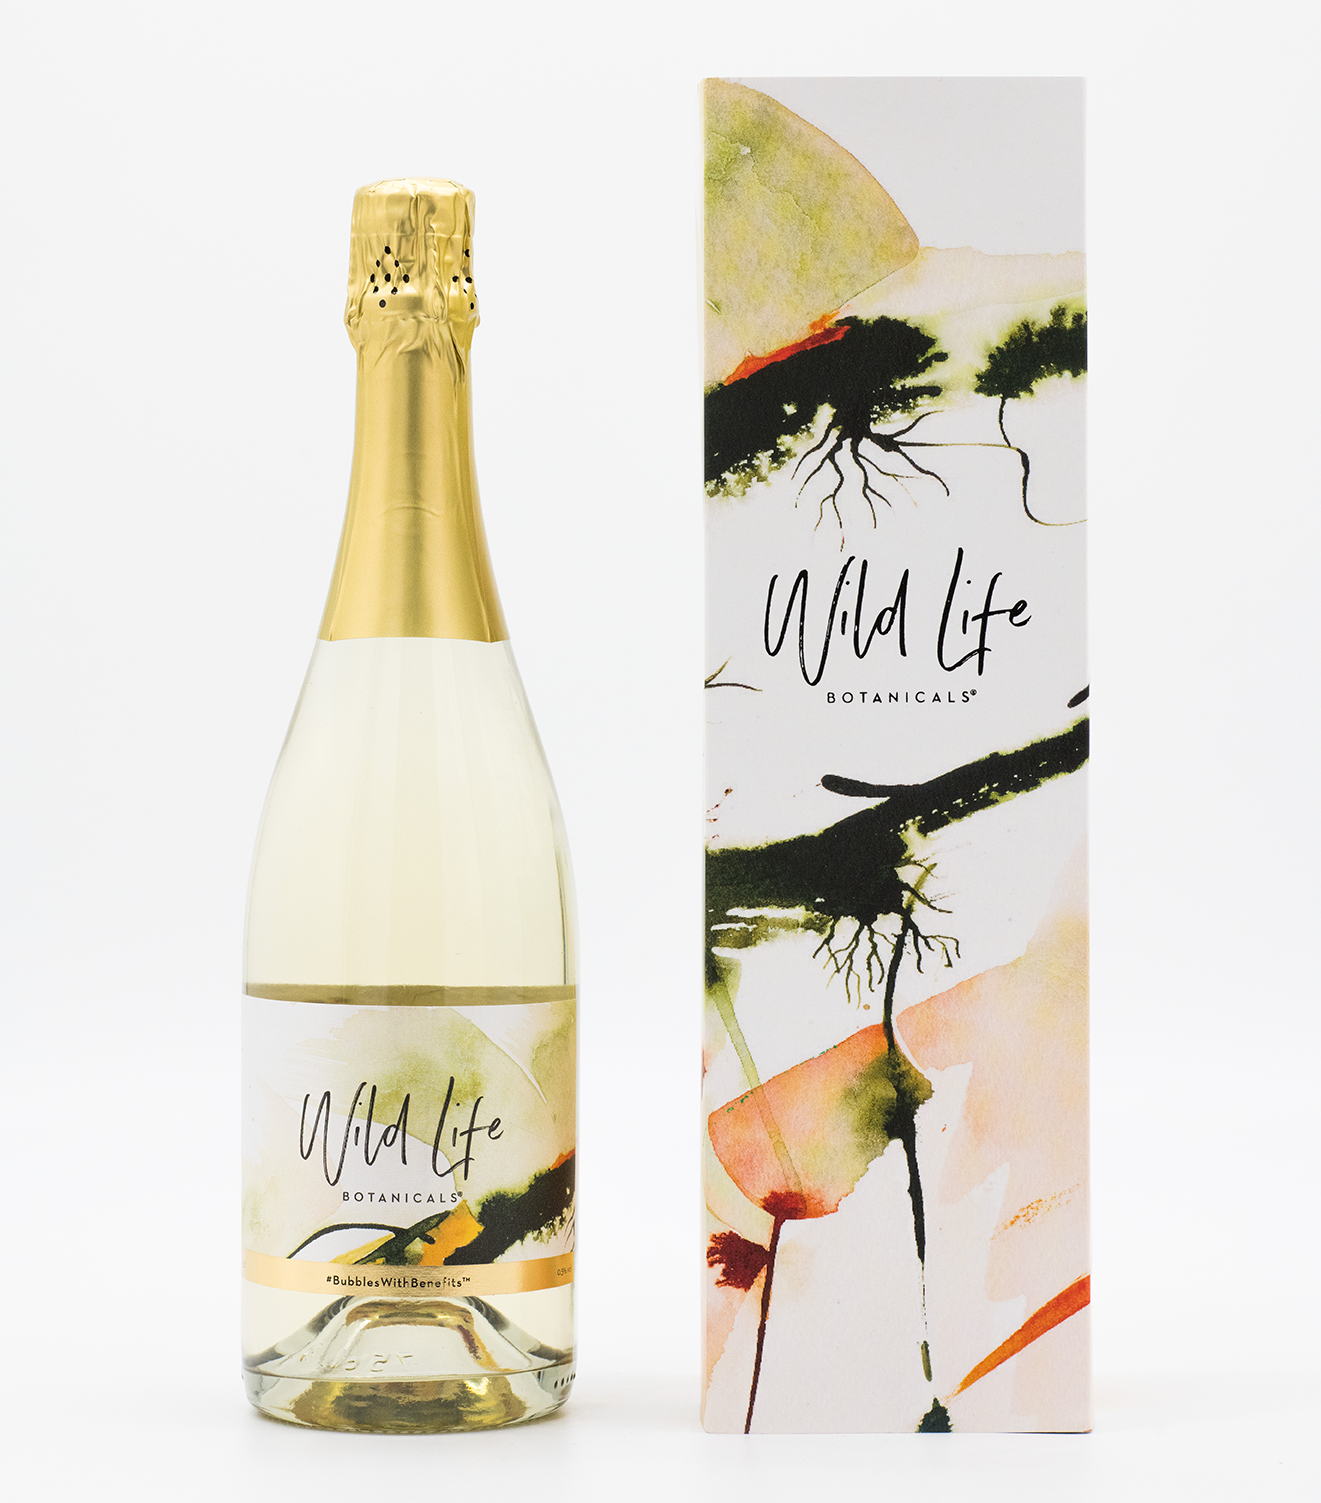 Wild Life Botanicals Nude open bottle on table with full glass of fizz. Ultra-low alcohol, low calorie and low carb sparkling wine. Healthy wine alternative. Bespoke Wild Life gift box incorporating original piece of artwork by Cornish artist.